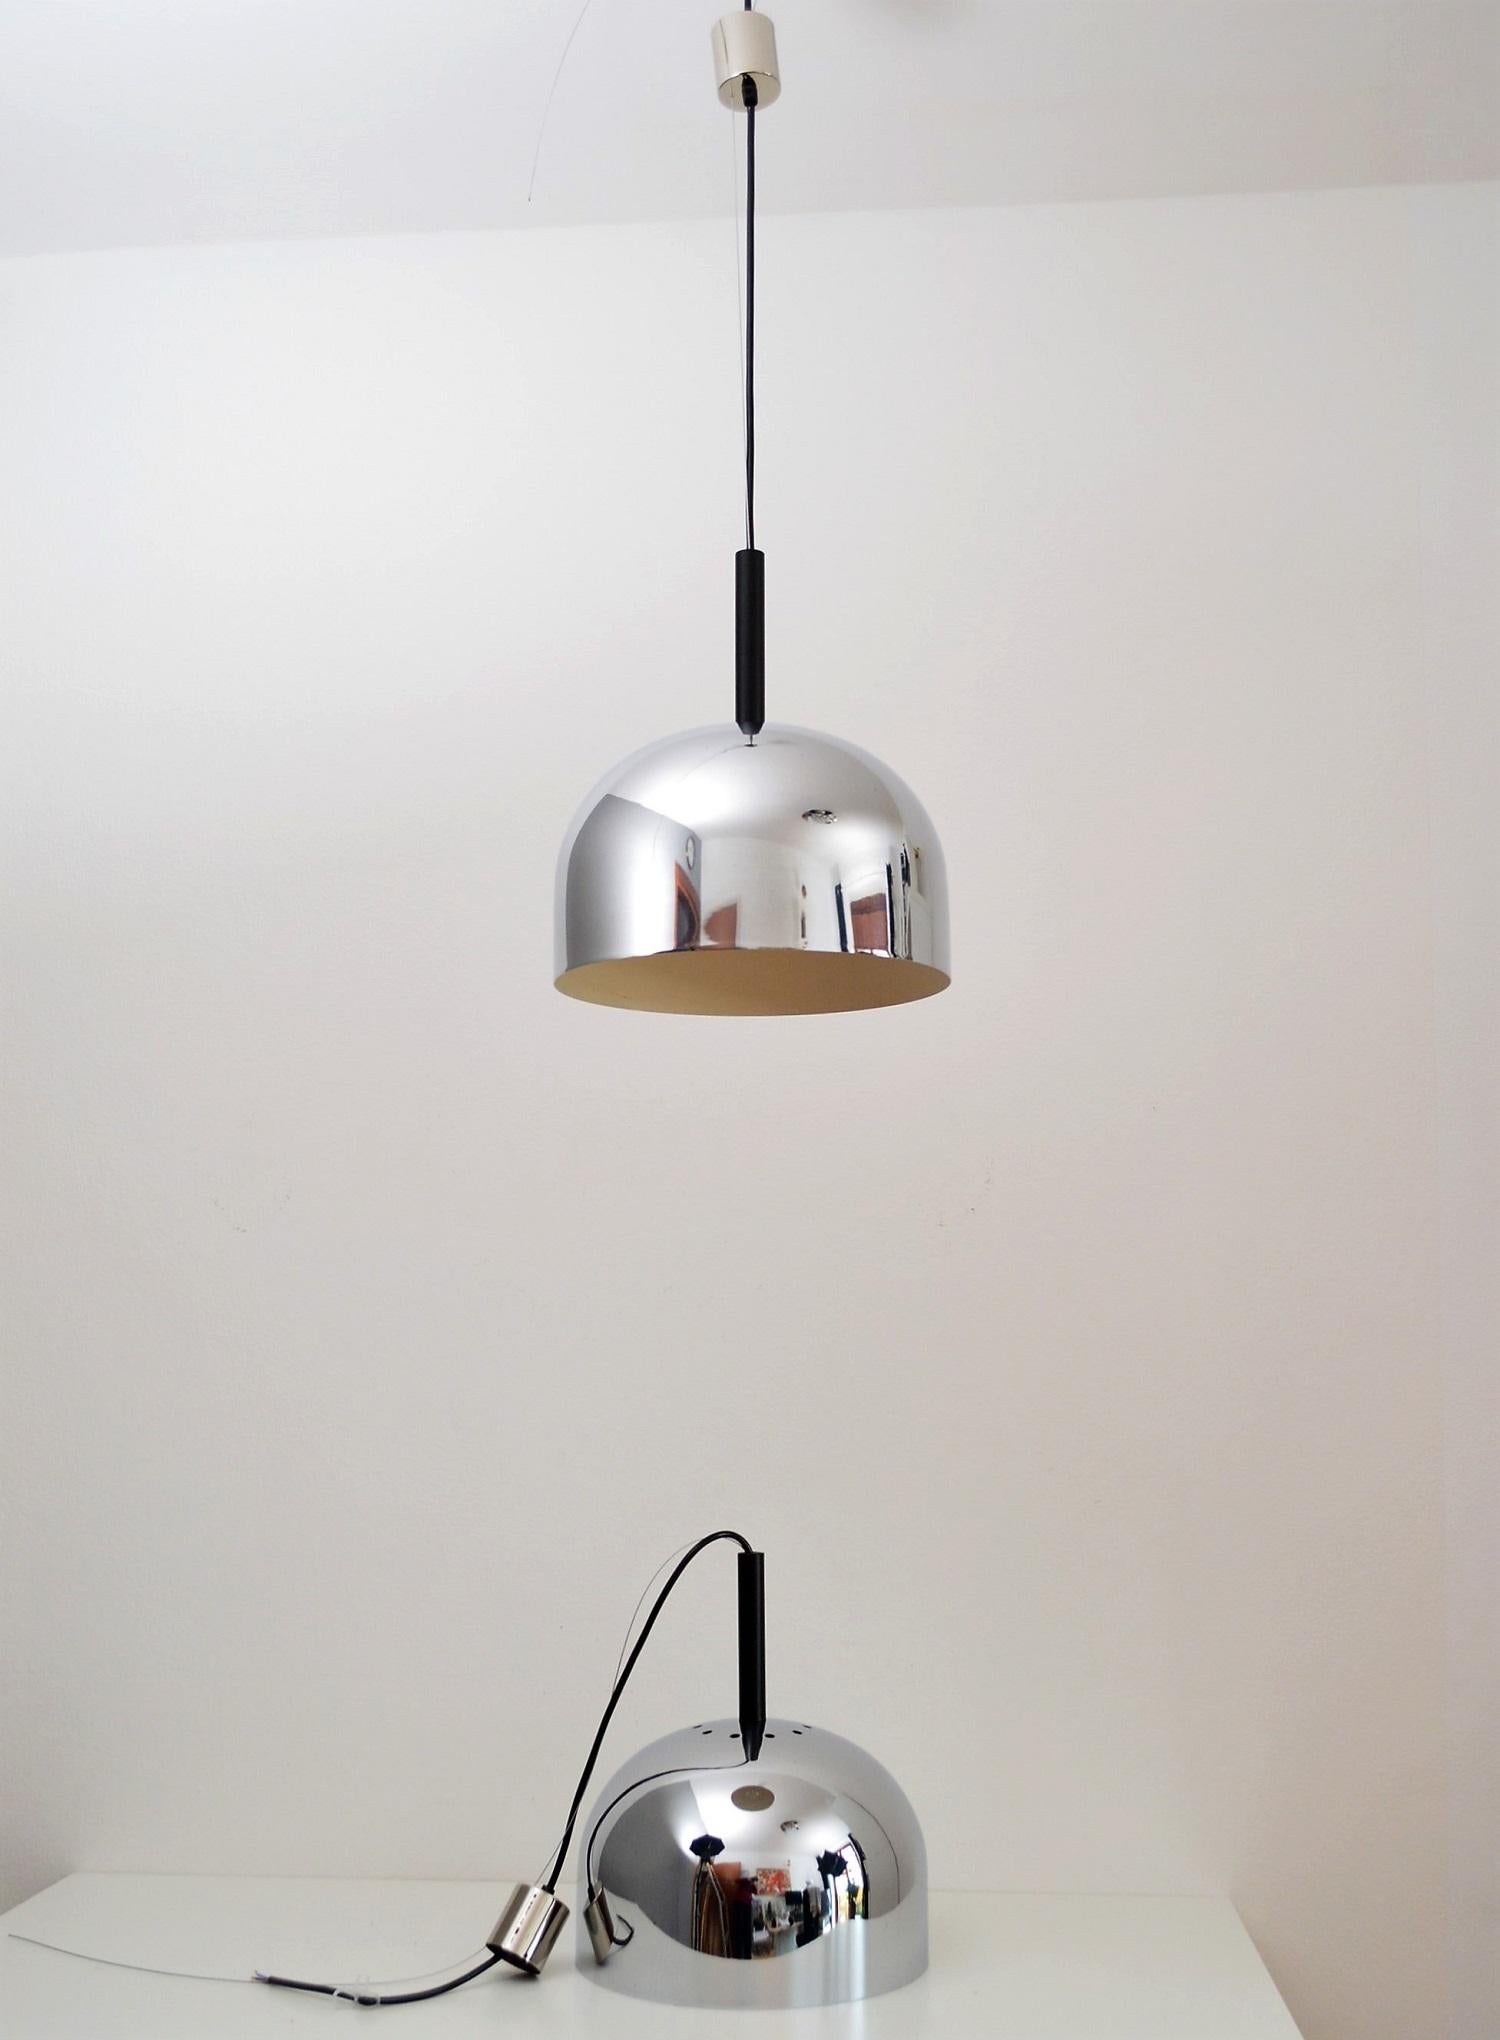 Beautiful set of two pendant lamps with chromed dome shade, inside white.
Made during the 1970s by Stilnovo, Italy.
New wiring, steel cable and chromed canopy.
Sold as set of two.
Light vintage signs of age and wear as shown on the pictures